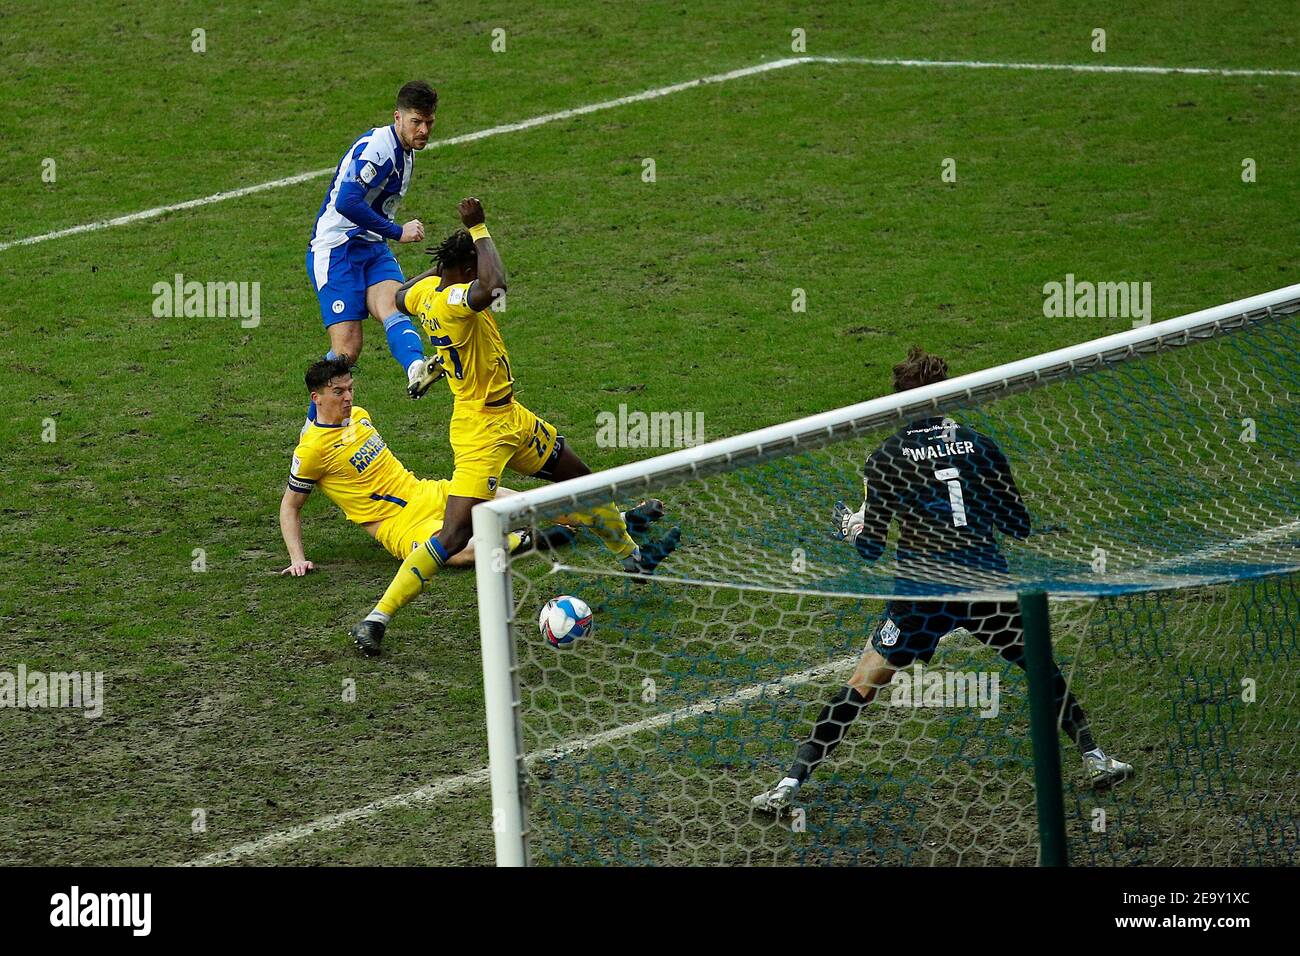 WIGAN, ENGLAND. FEB 6TH: Wigans Jamie Proctor shoots and scores to make it 2-2 during the Sky Bet League 1 match between Wigan Athletic and AFC Wimbledon at the DW Stadium, Wigan on Saturday 6th February 2021. (Credit: Chris Donnelly | MI News) Credit: MI News & Sport /Alamy Live News Stock Photo